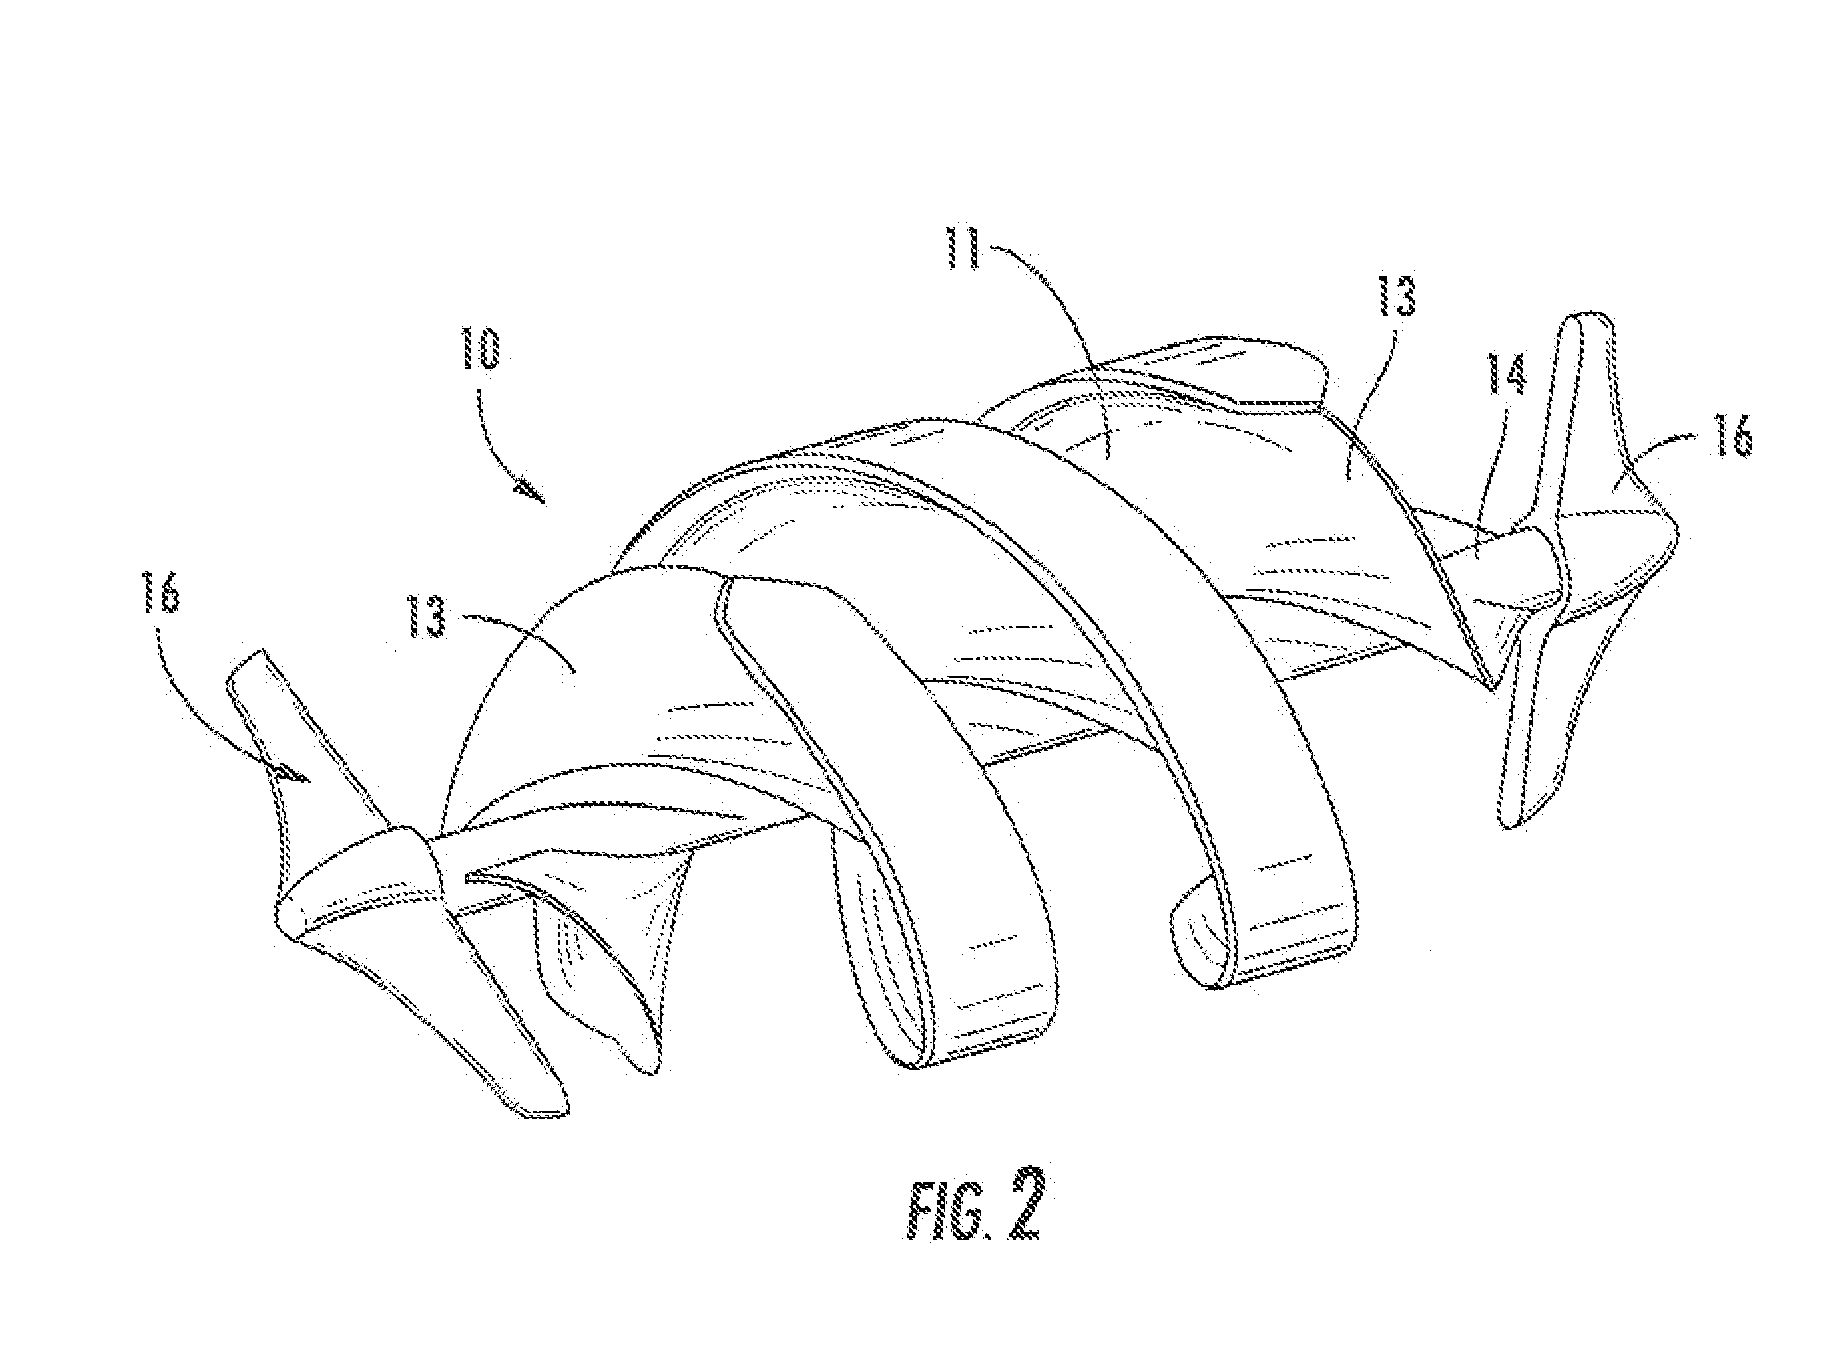 Tapered helical auger turbine to convert hydrokinetic energy into electrical energy